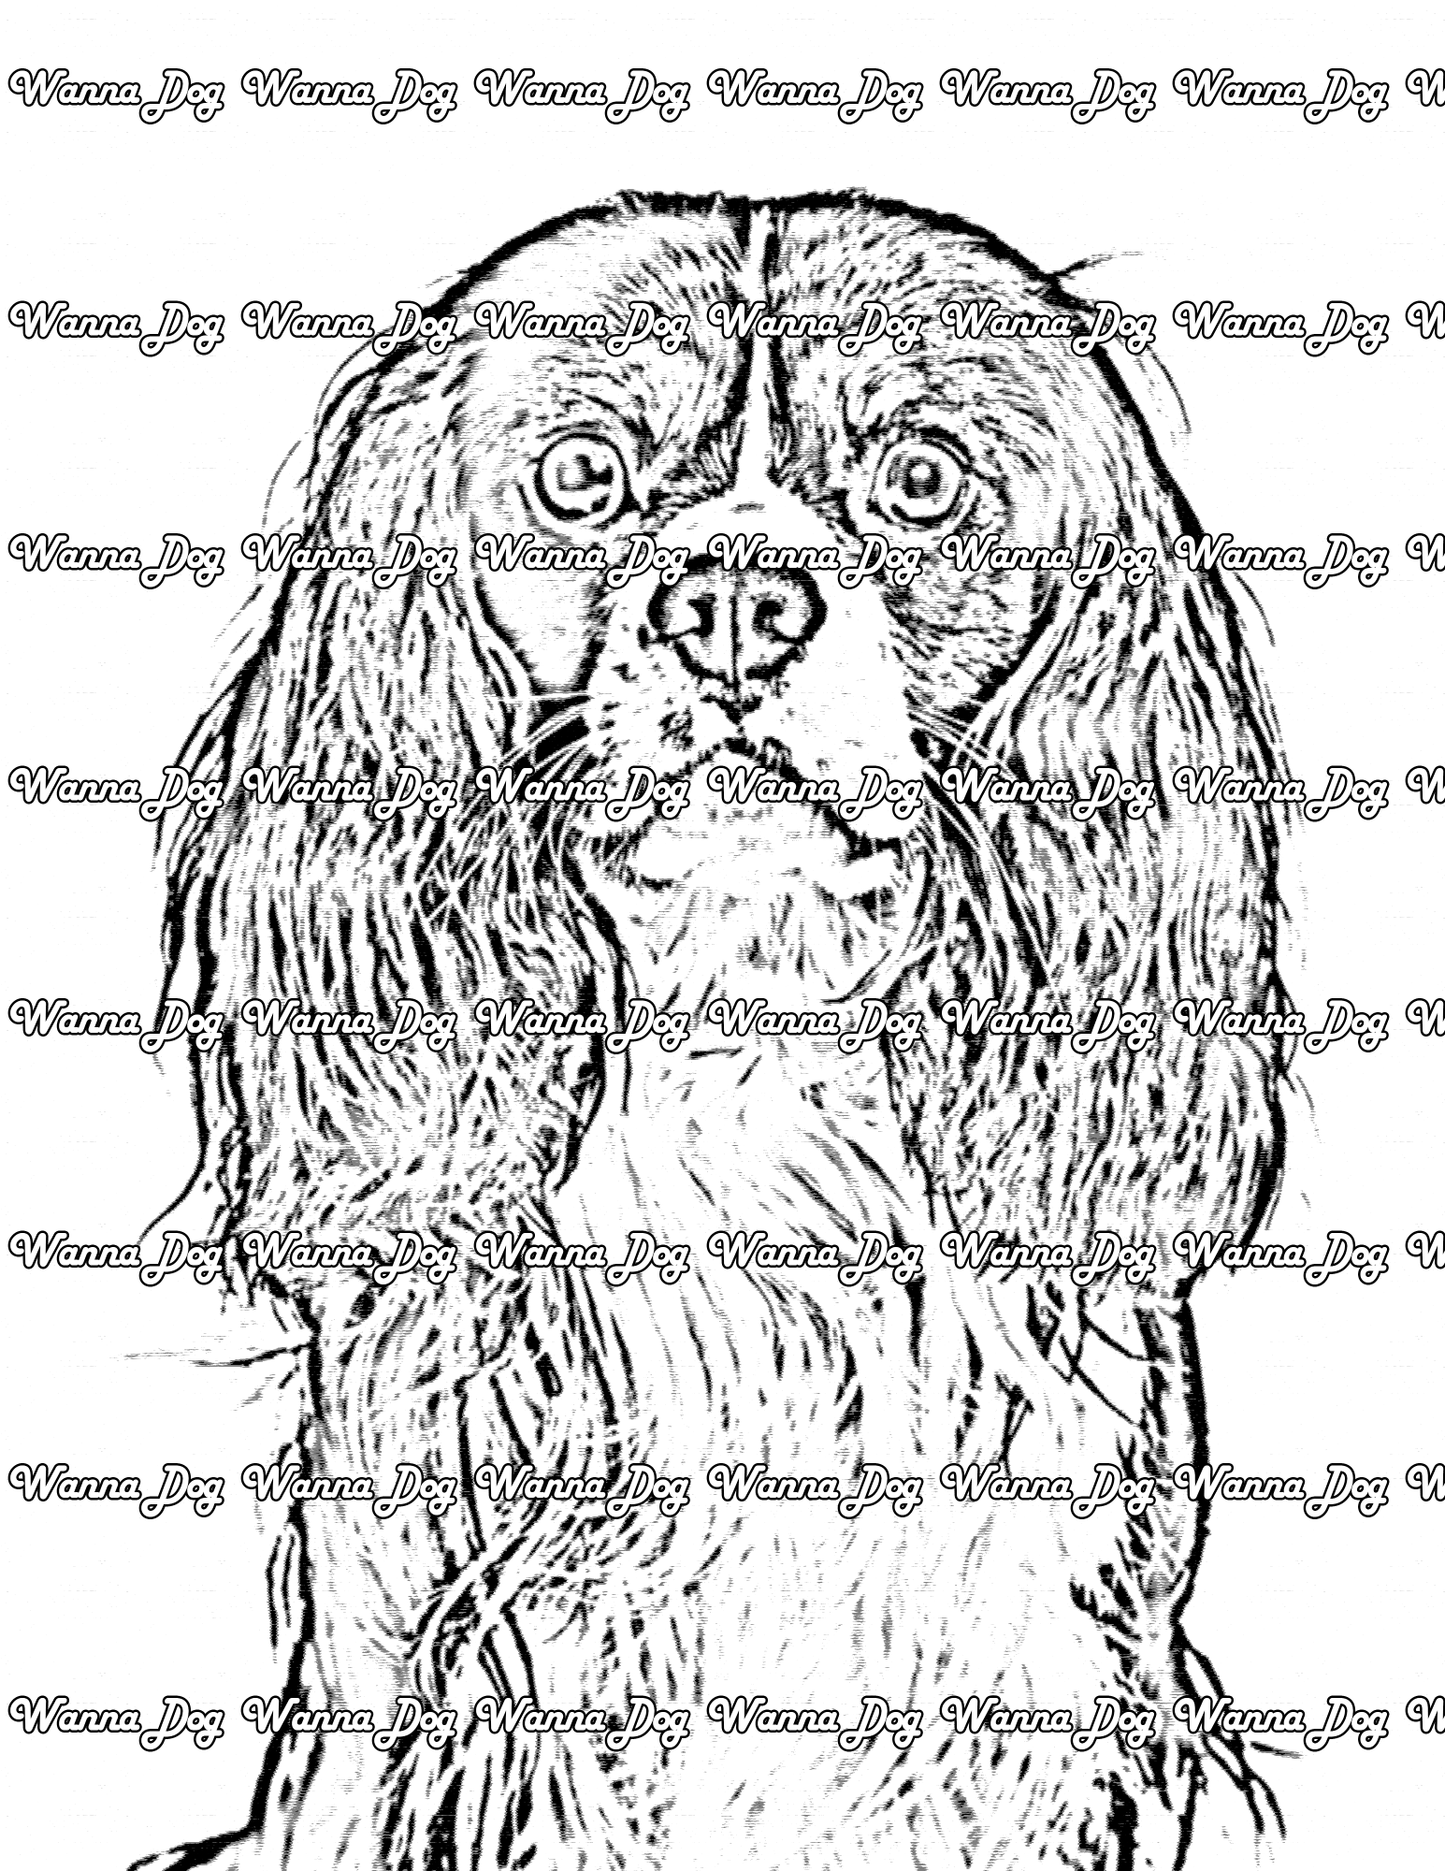 Cavalier King Charles Spaniel Coloring Page of a Cavalier King Charles Spaniel close up with wide eyes